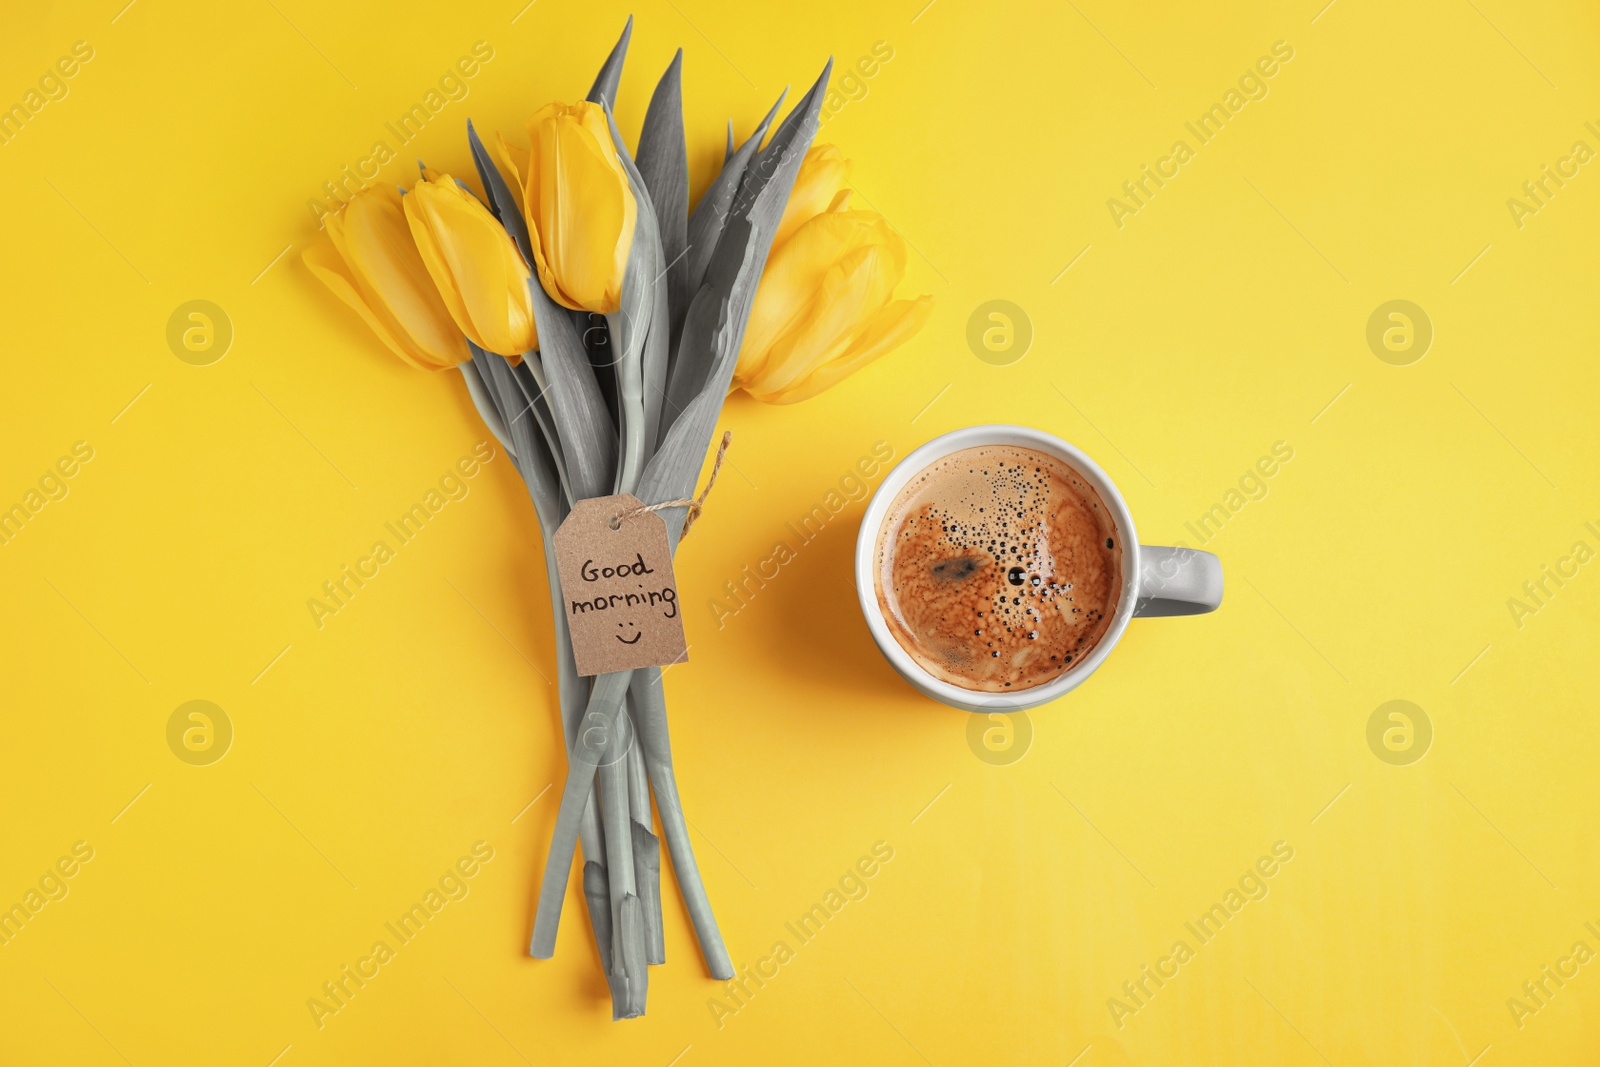 Image of Color of the year 2021. Aromatic coffee, beautiful tulips and GOOD MORNING wish on yellow background, flat lay